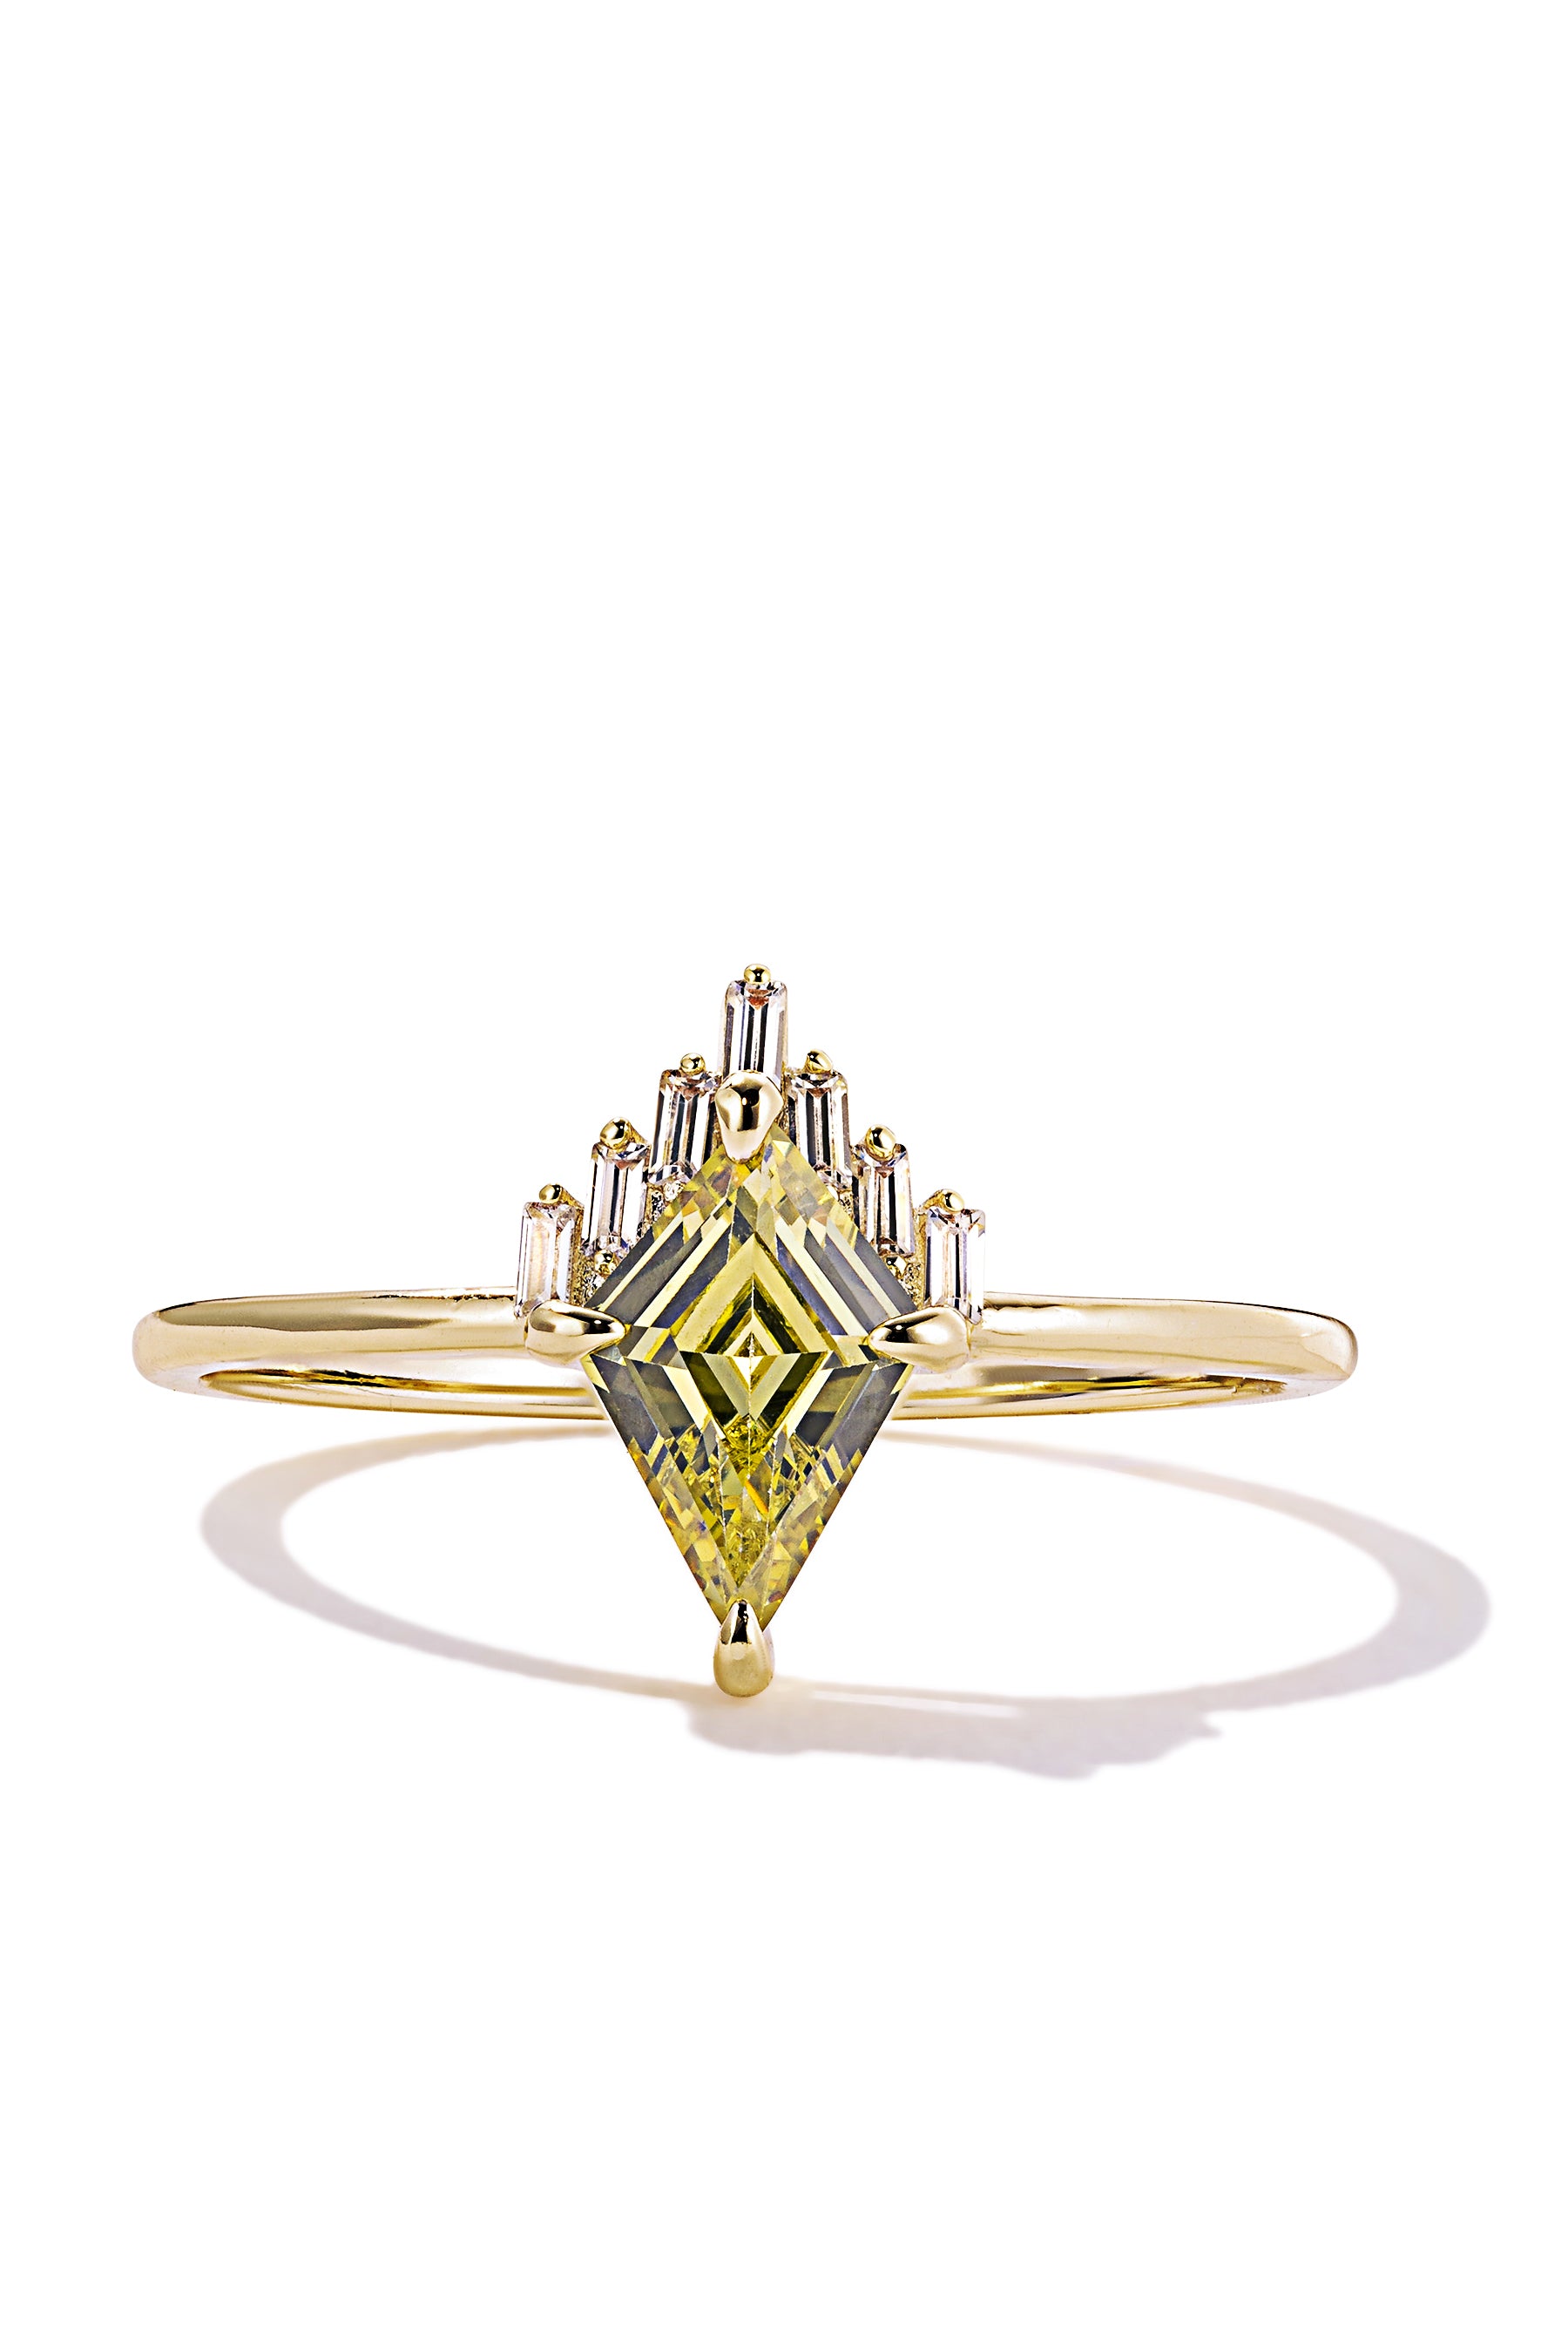 Gold Halo Style Ring Featuring a Peridot Green Crystal | Chakra by Oomiay